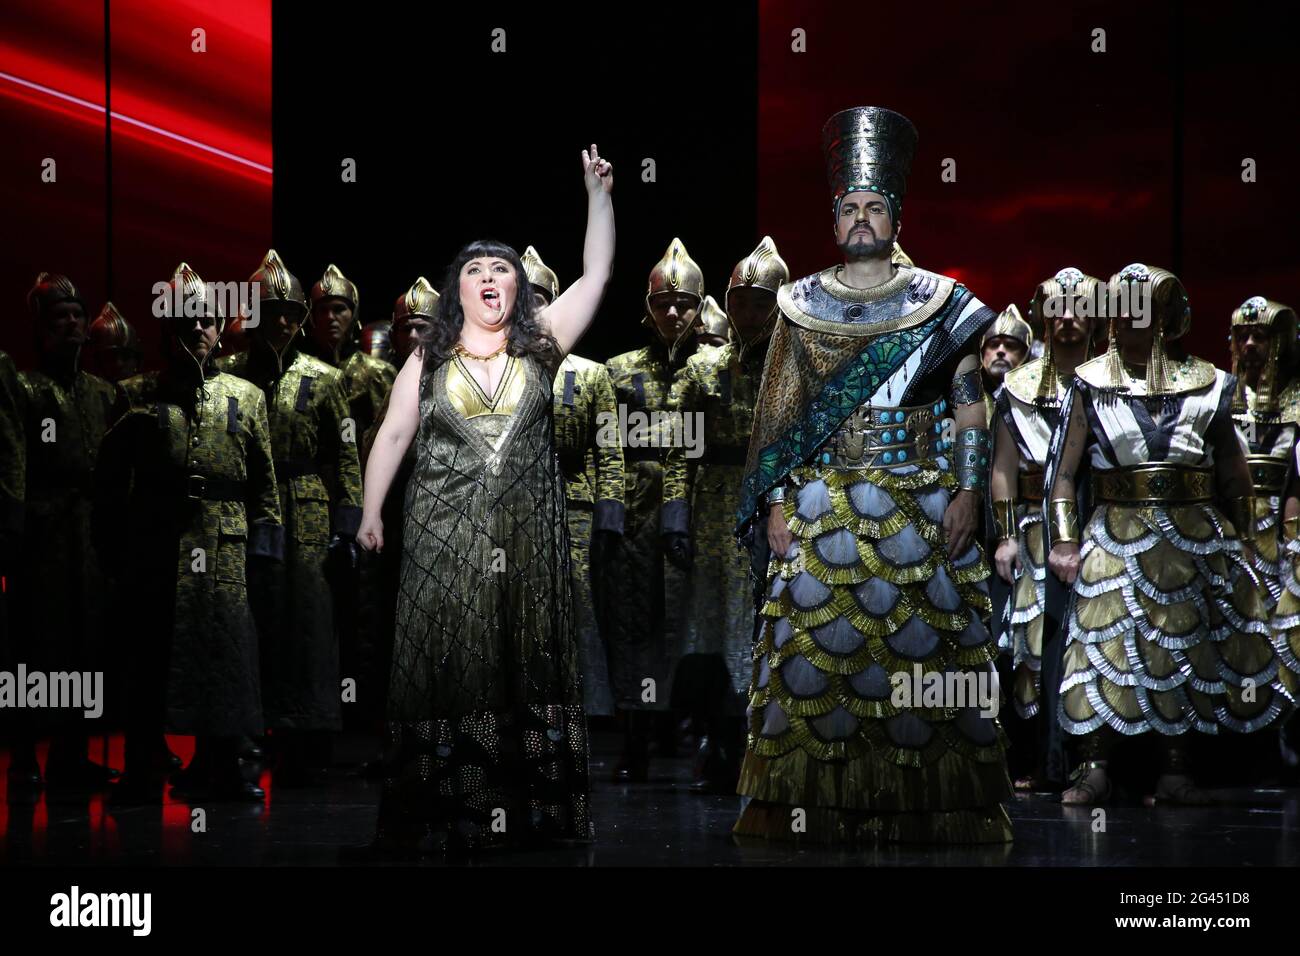 Sydney, Australia. 19th June 2021. Final dress rehearsal of Opera Australia’s spectacular digital production of Verdi’s Aida, ahead of its opening on Tuesday 22 June and running until 13 August at the Joan Sutherland Theatre, Sydney Opera House. Pictured: Elena Gabouri, who plays the role of Amneris. Credit: Richard Milnes/Alamy Live News Stock Photo